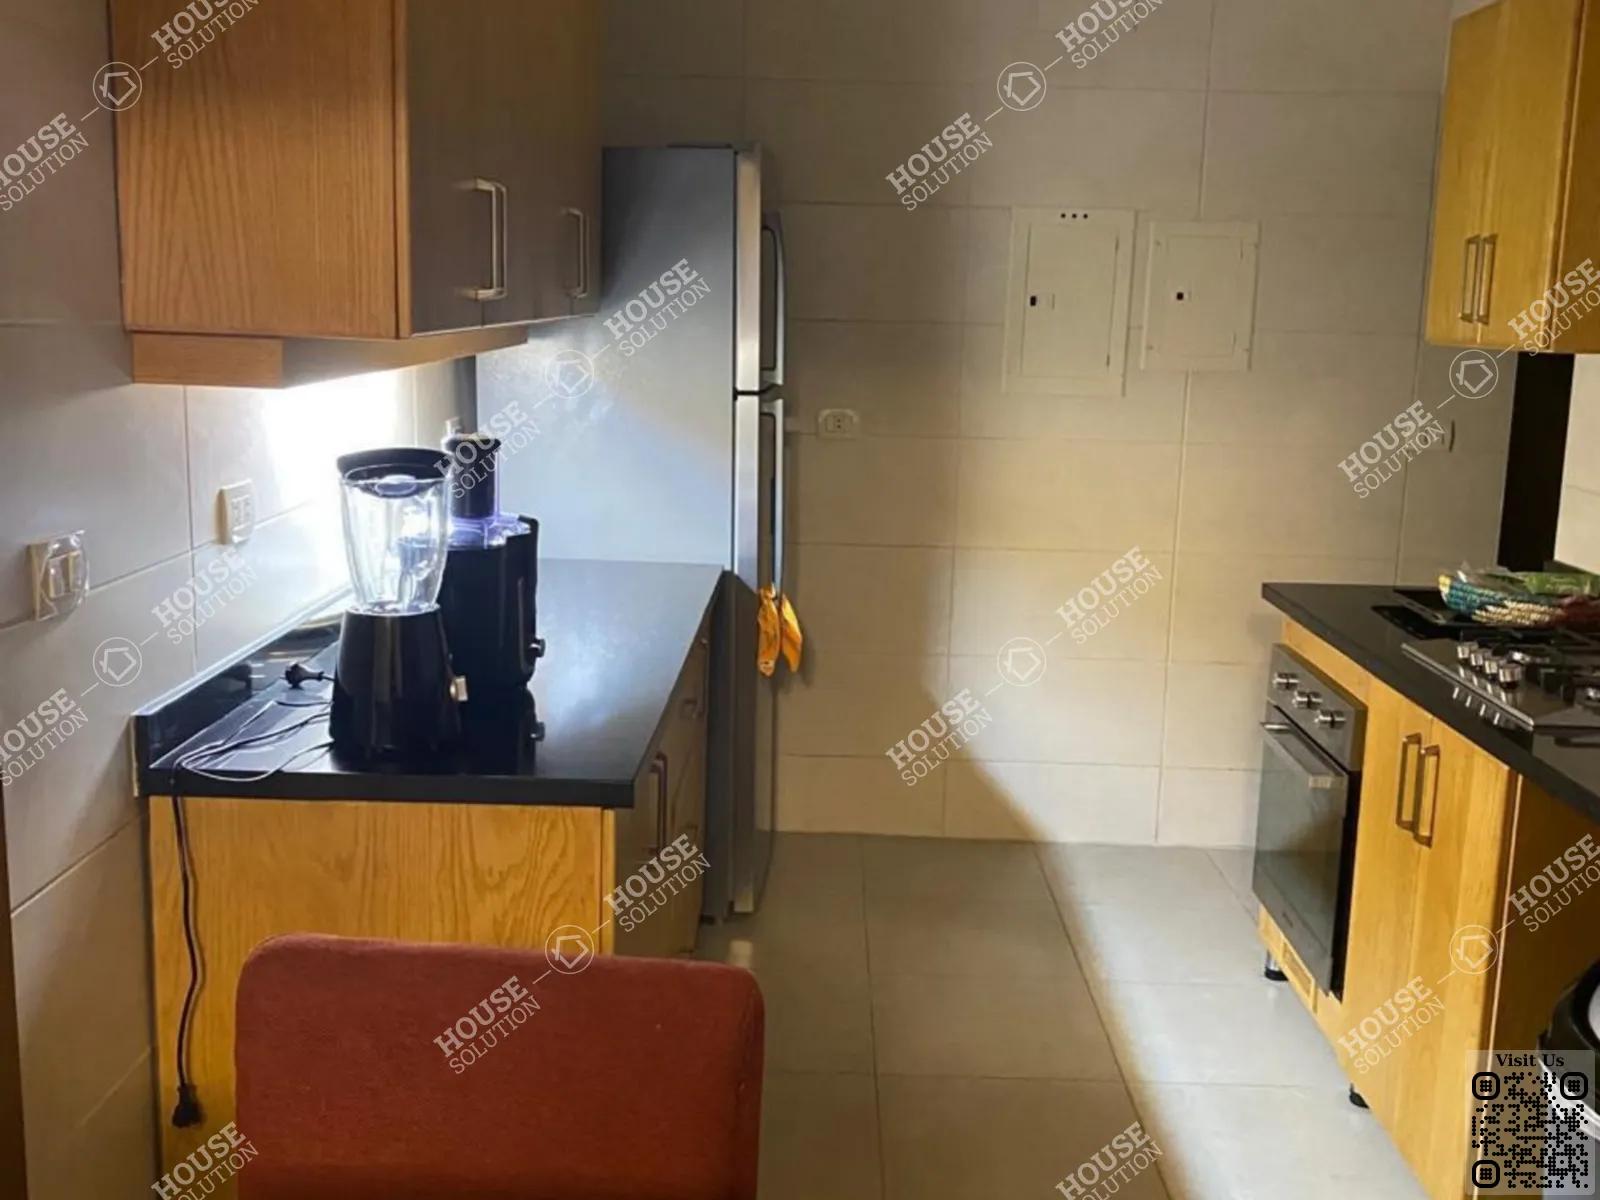 KITCHEN  @ Apartments For Rent In Maadi Maadi Sarayat Area: 165 m² consists of 3 Bedrooms 2 Bathrooms Modern furnished 5 stars #5907-2